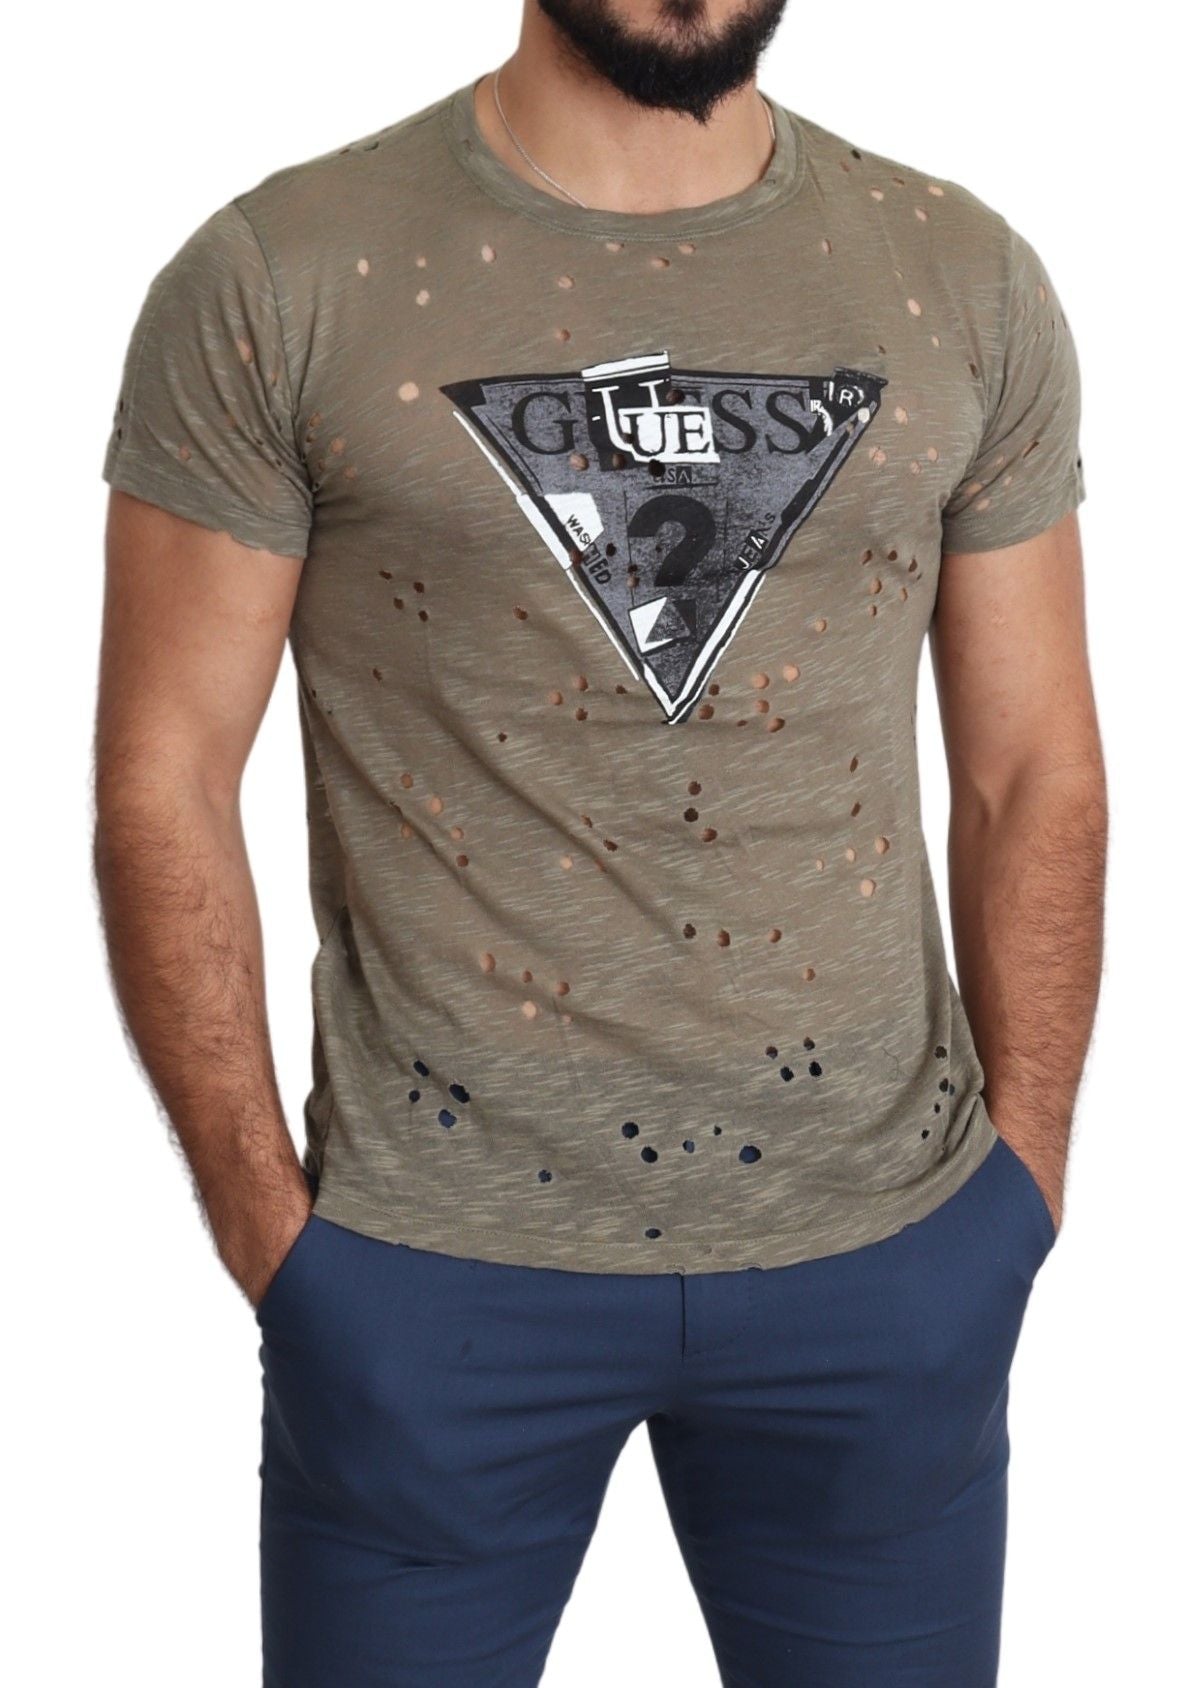 Guess Brown Cotton Stretch Logo Print Men Casual Perforated T-shirt